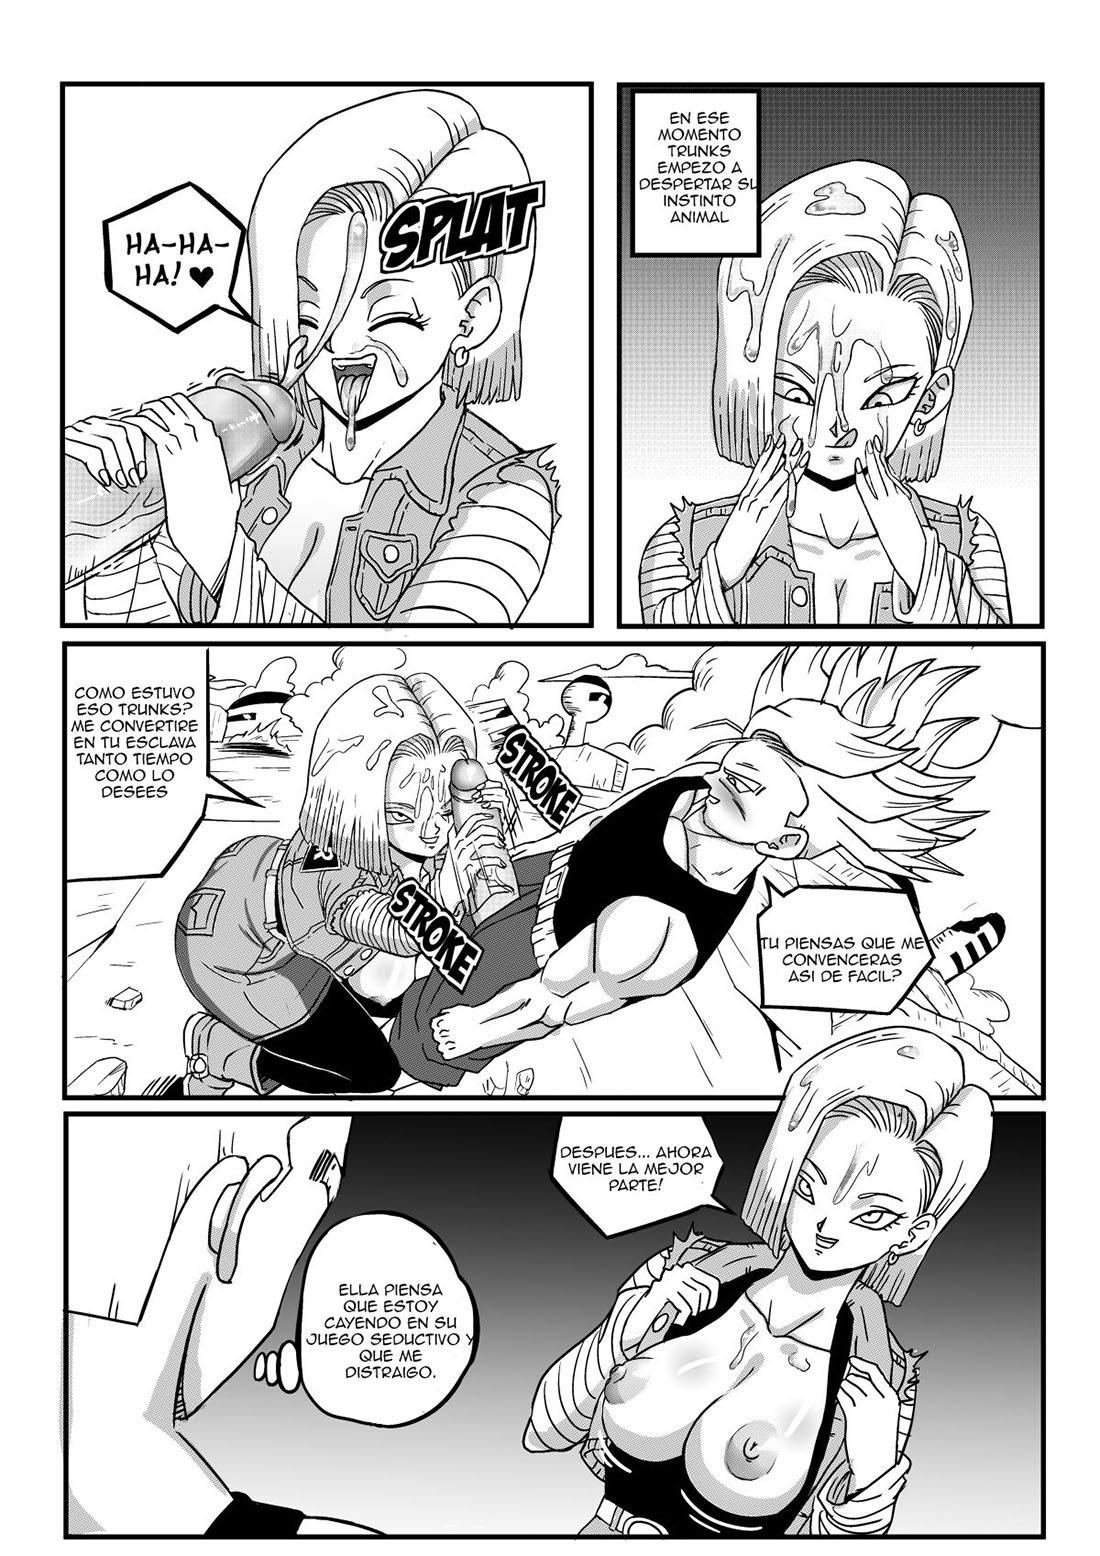 ANDROID 18 Stays in the FUTURE